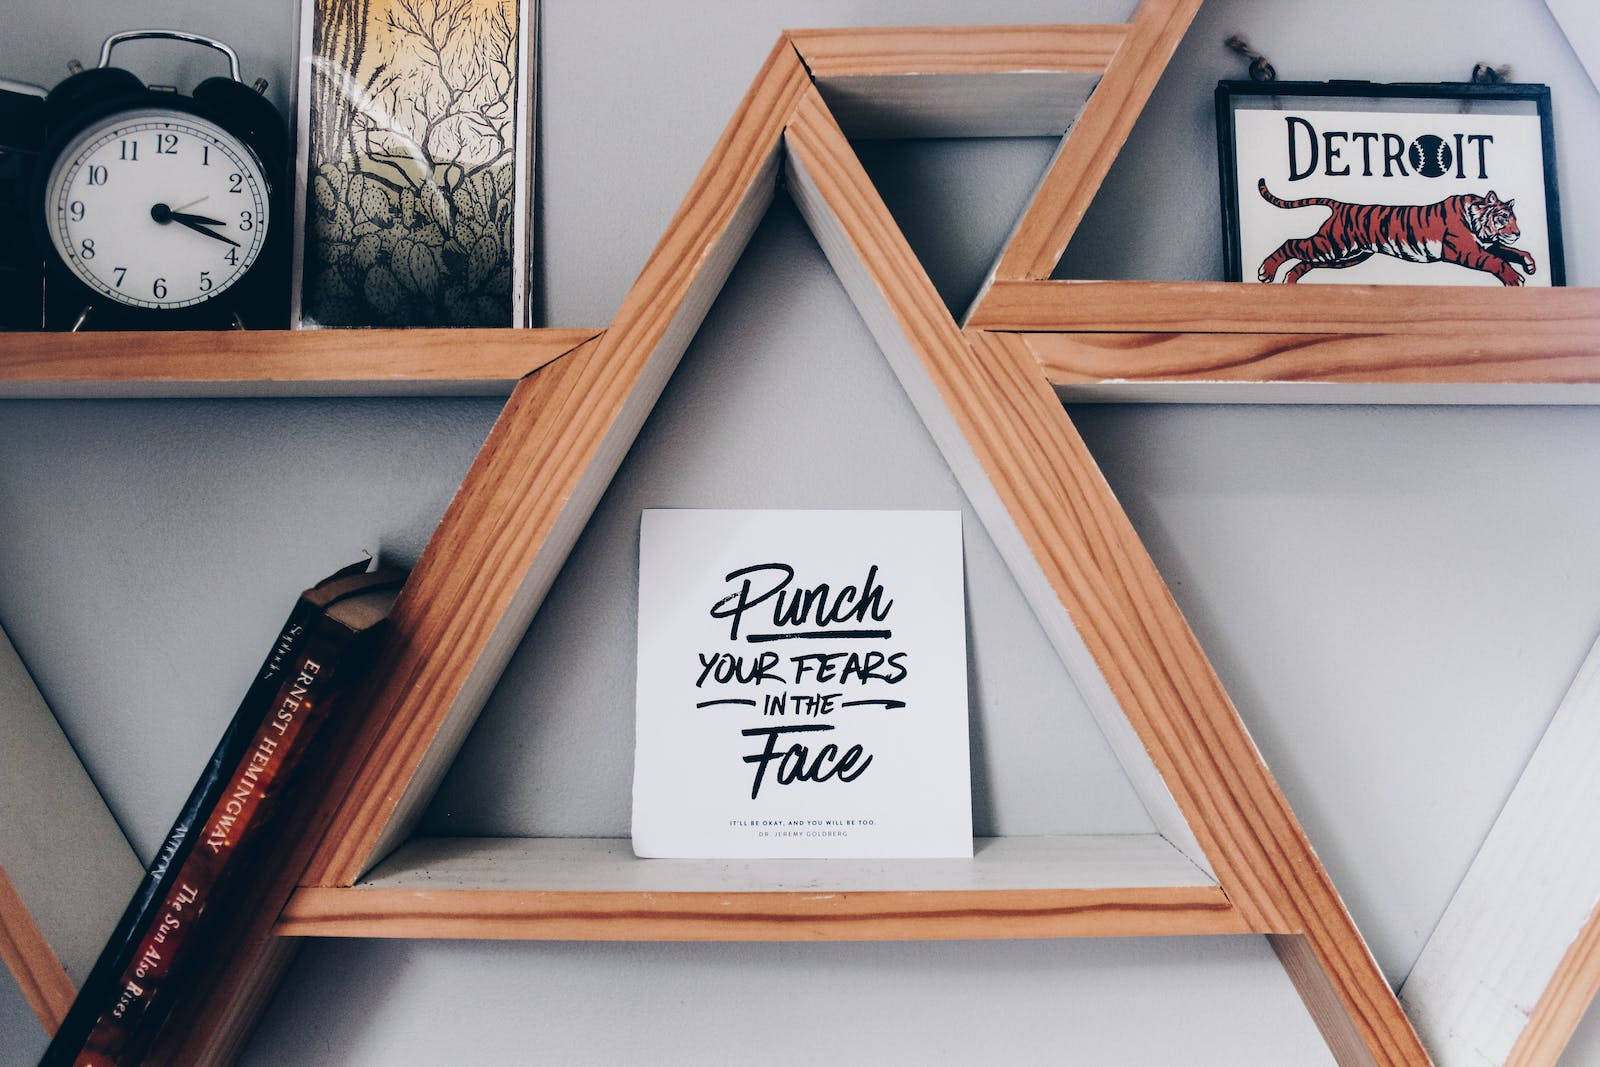 Wooden Shelves With Motivational Quotes